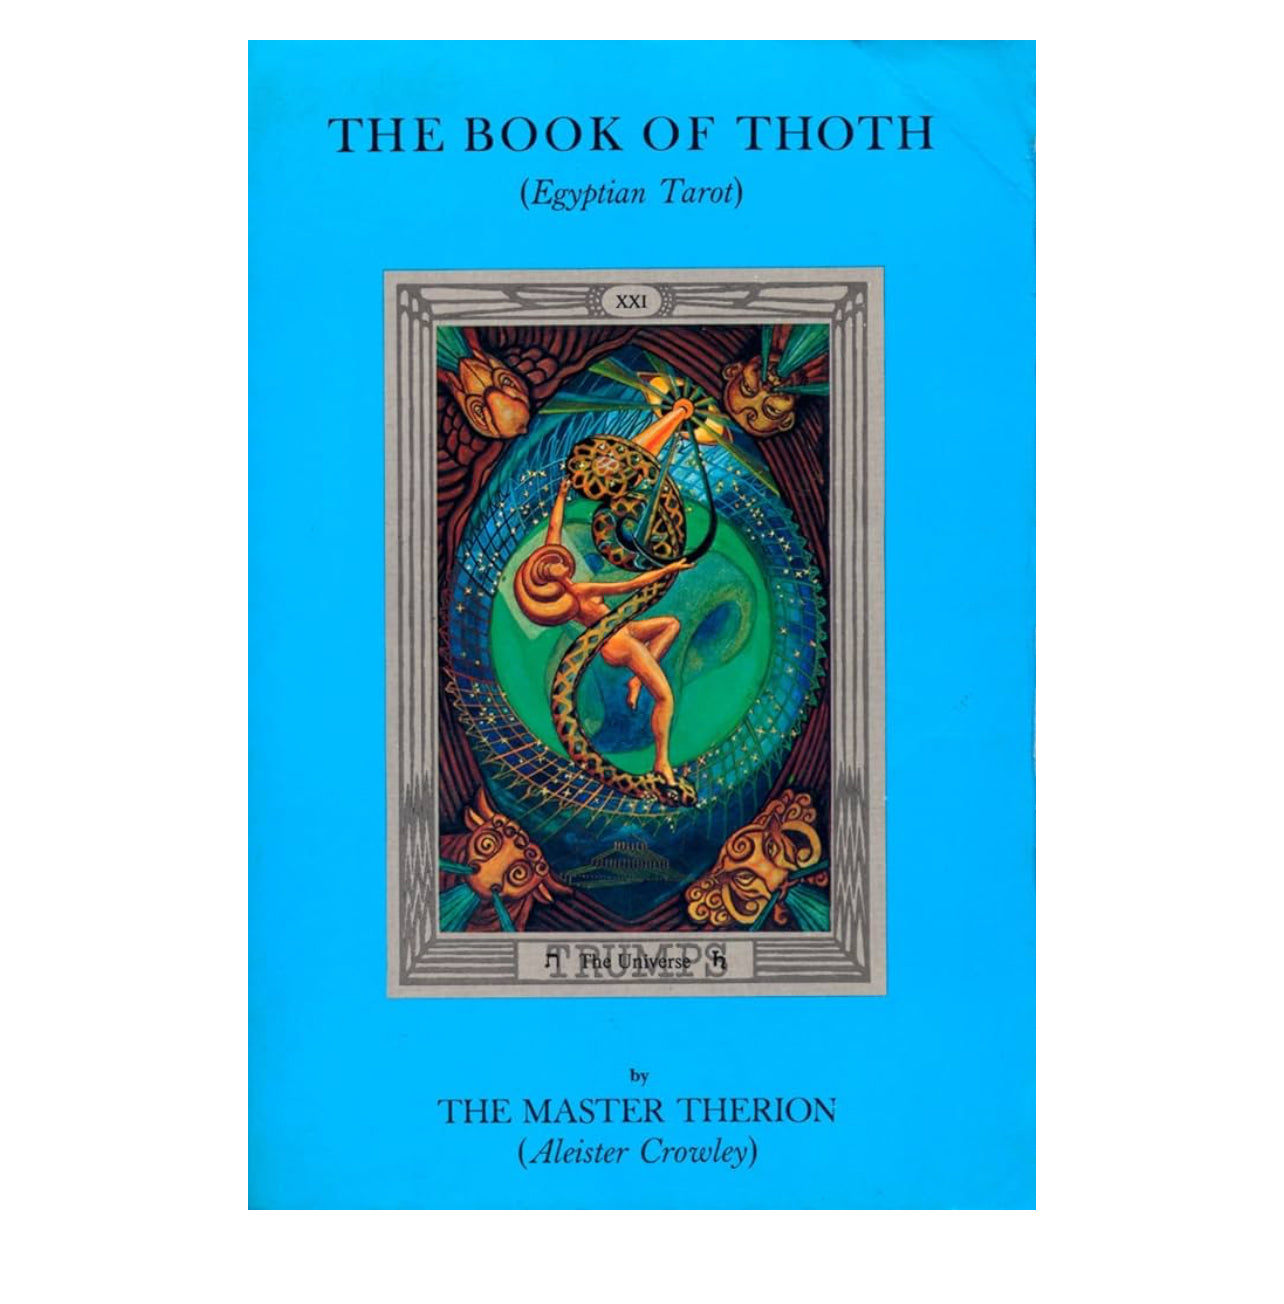 Book of Thoth (v3 #5) By Aleister Crowley